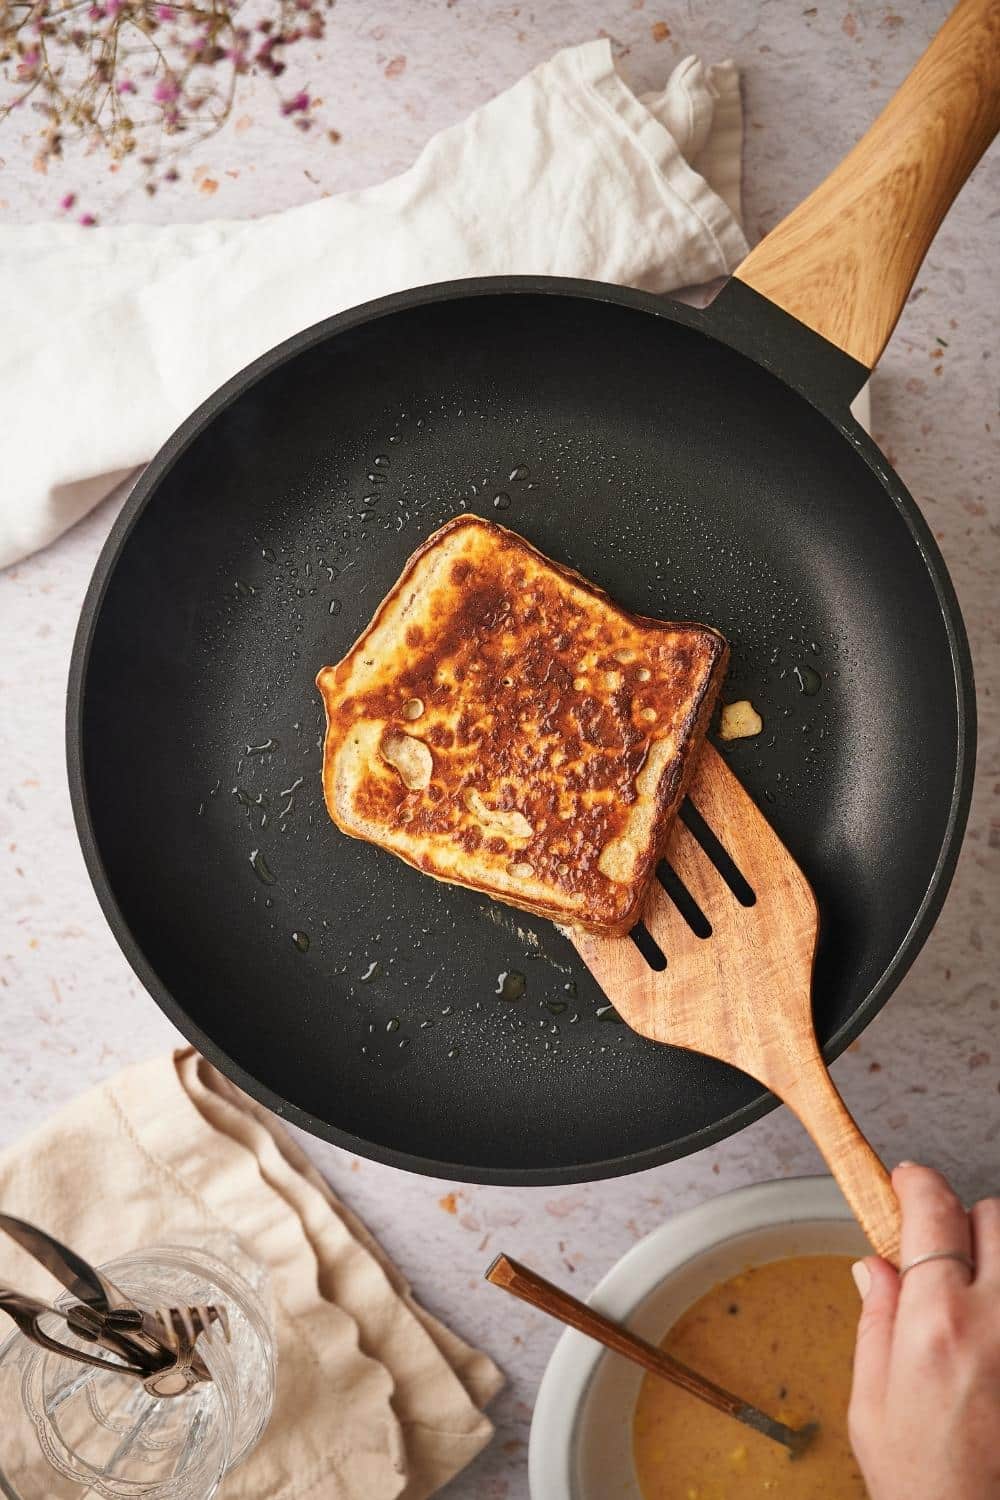 A cooked slice of french toast on a black pan with a wooden handle. A wooden spatula is being used to lift the french toast.